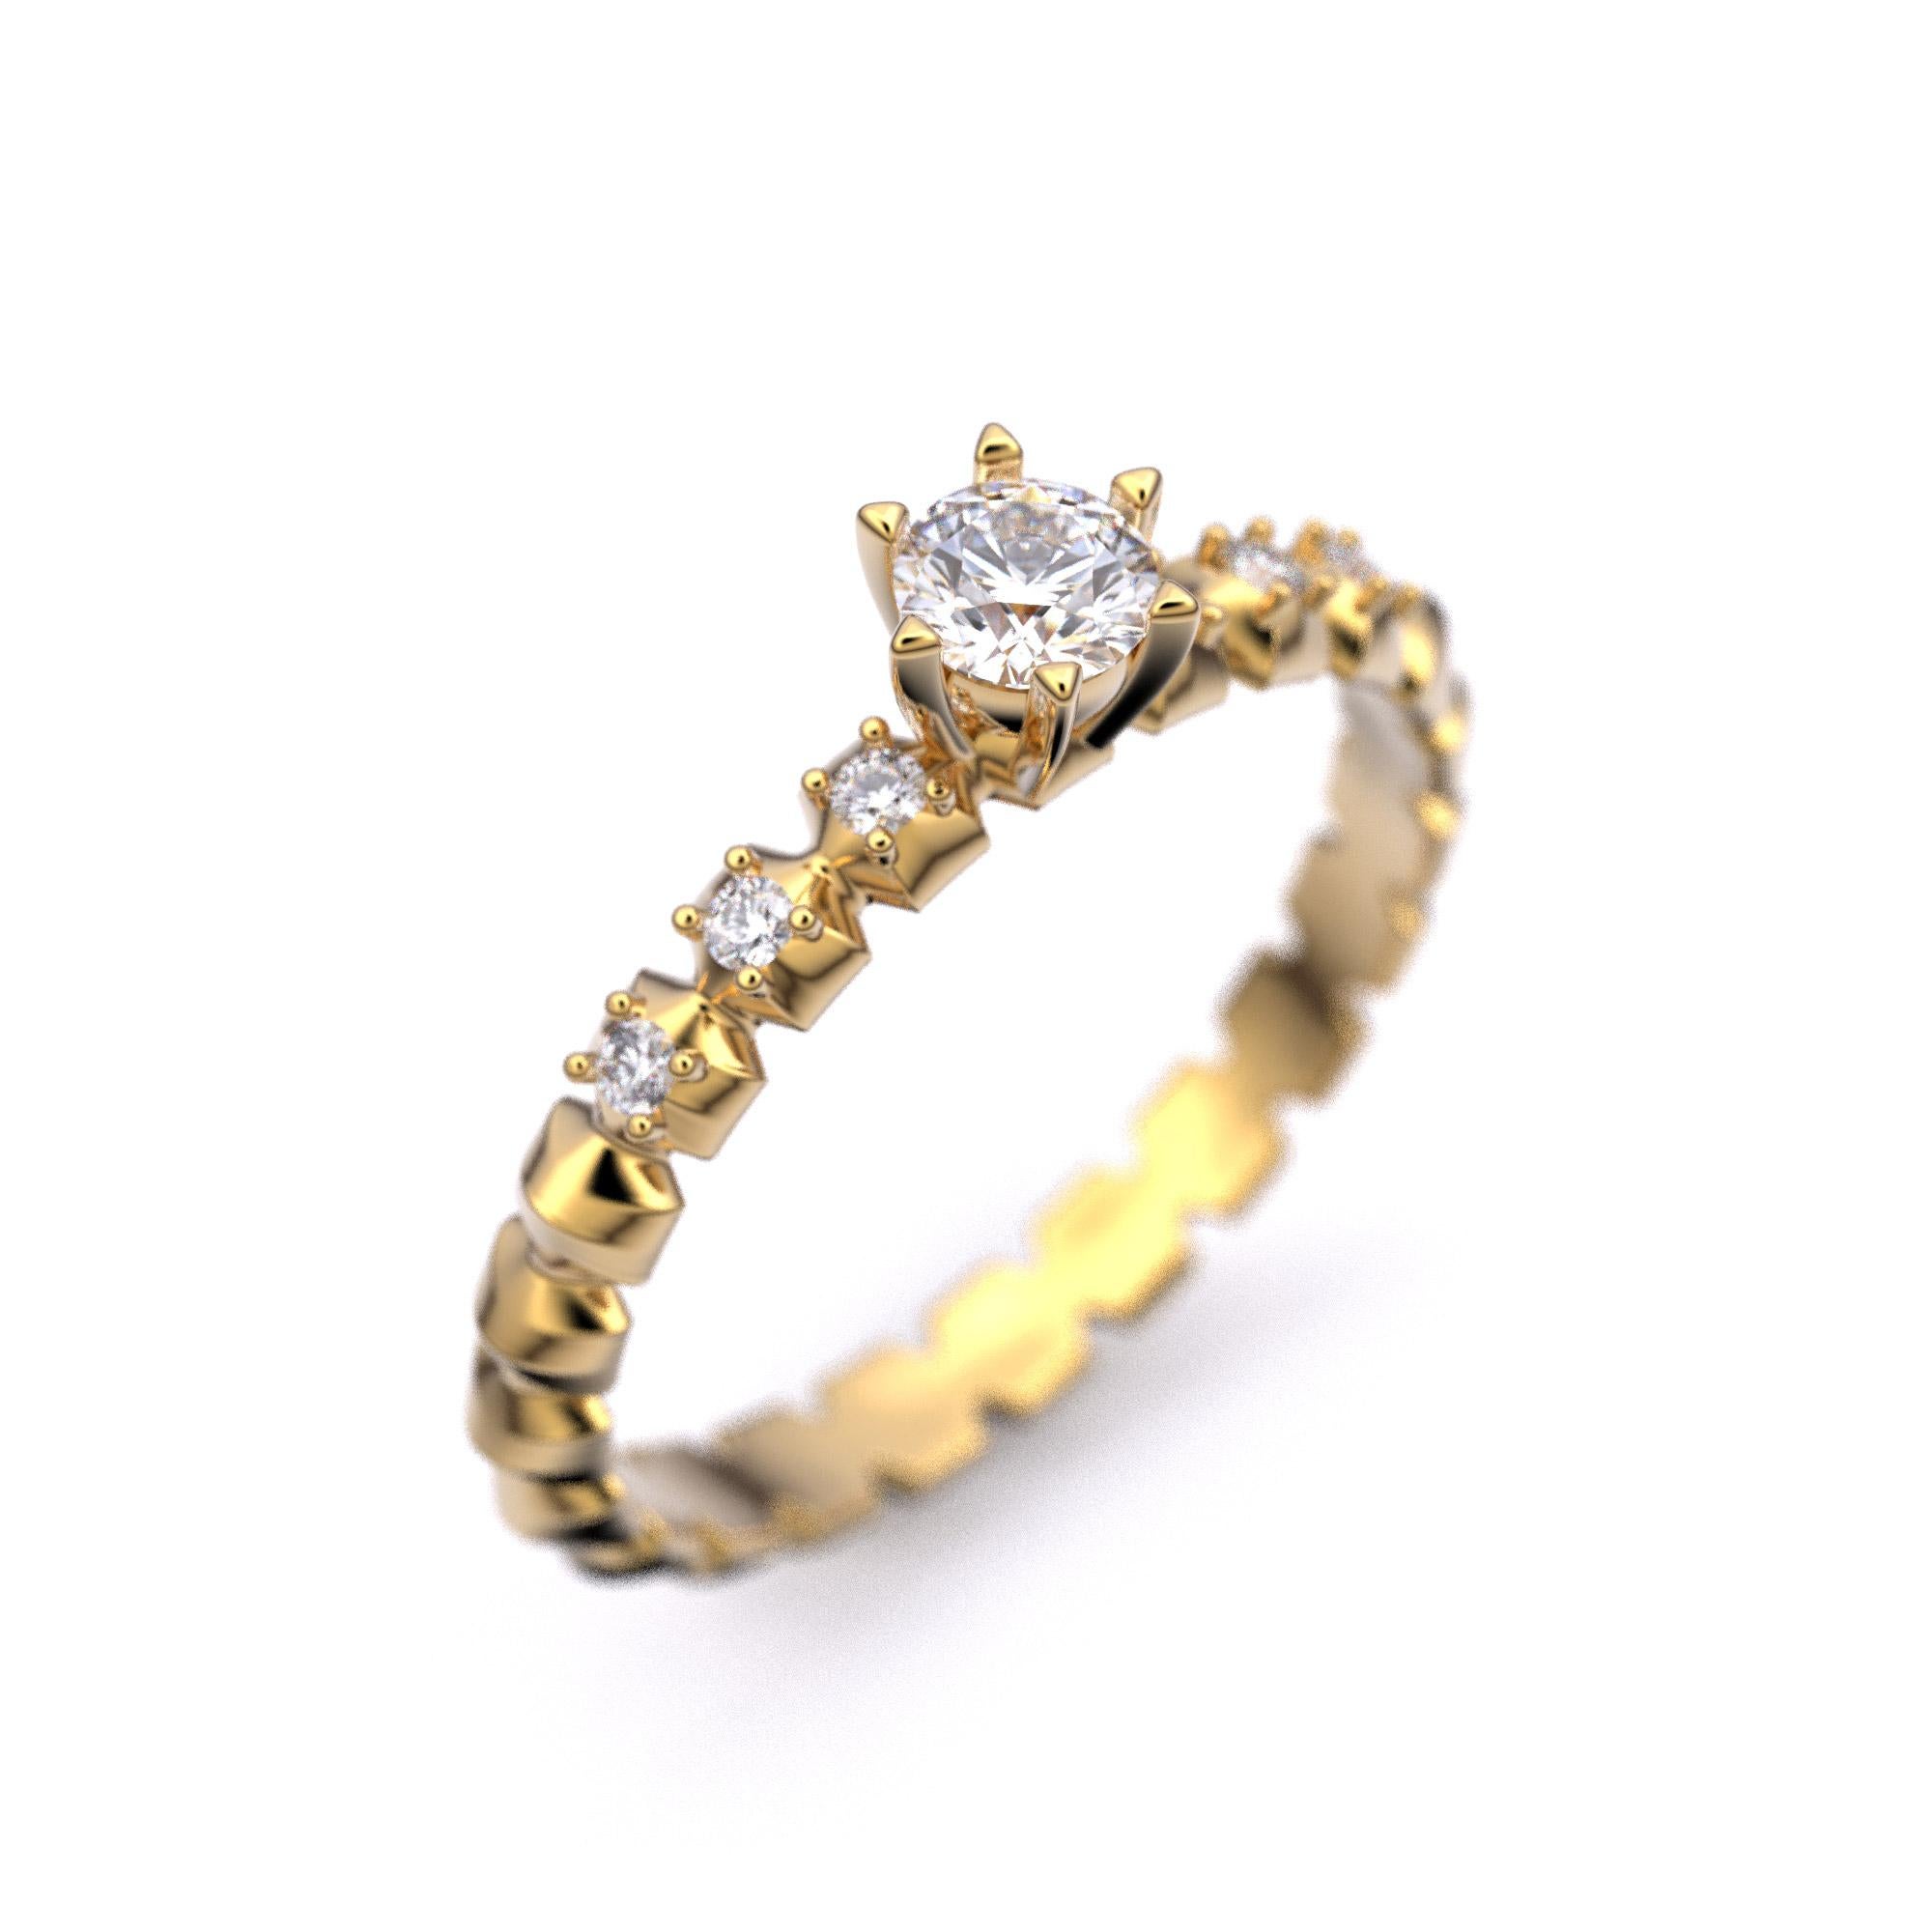 For Sale:  Italian-Made 0.32 Carat Diamond Engagement Ring in 14k Solid Gold 12